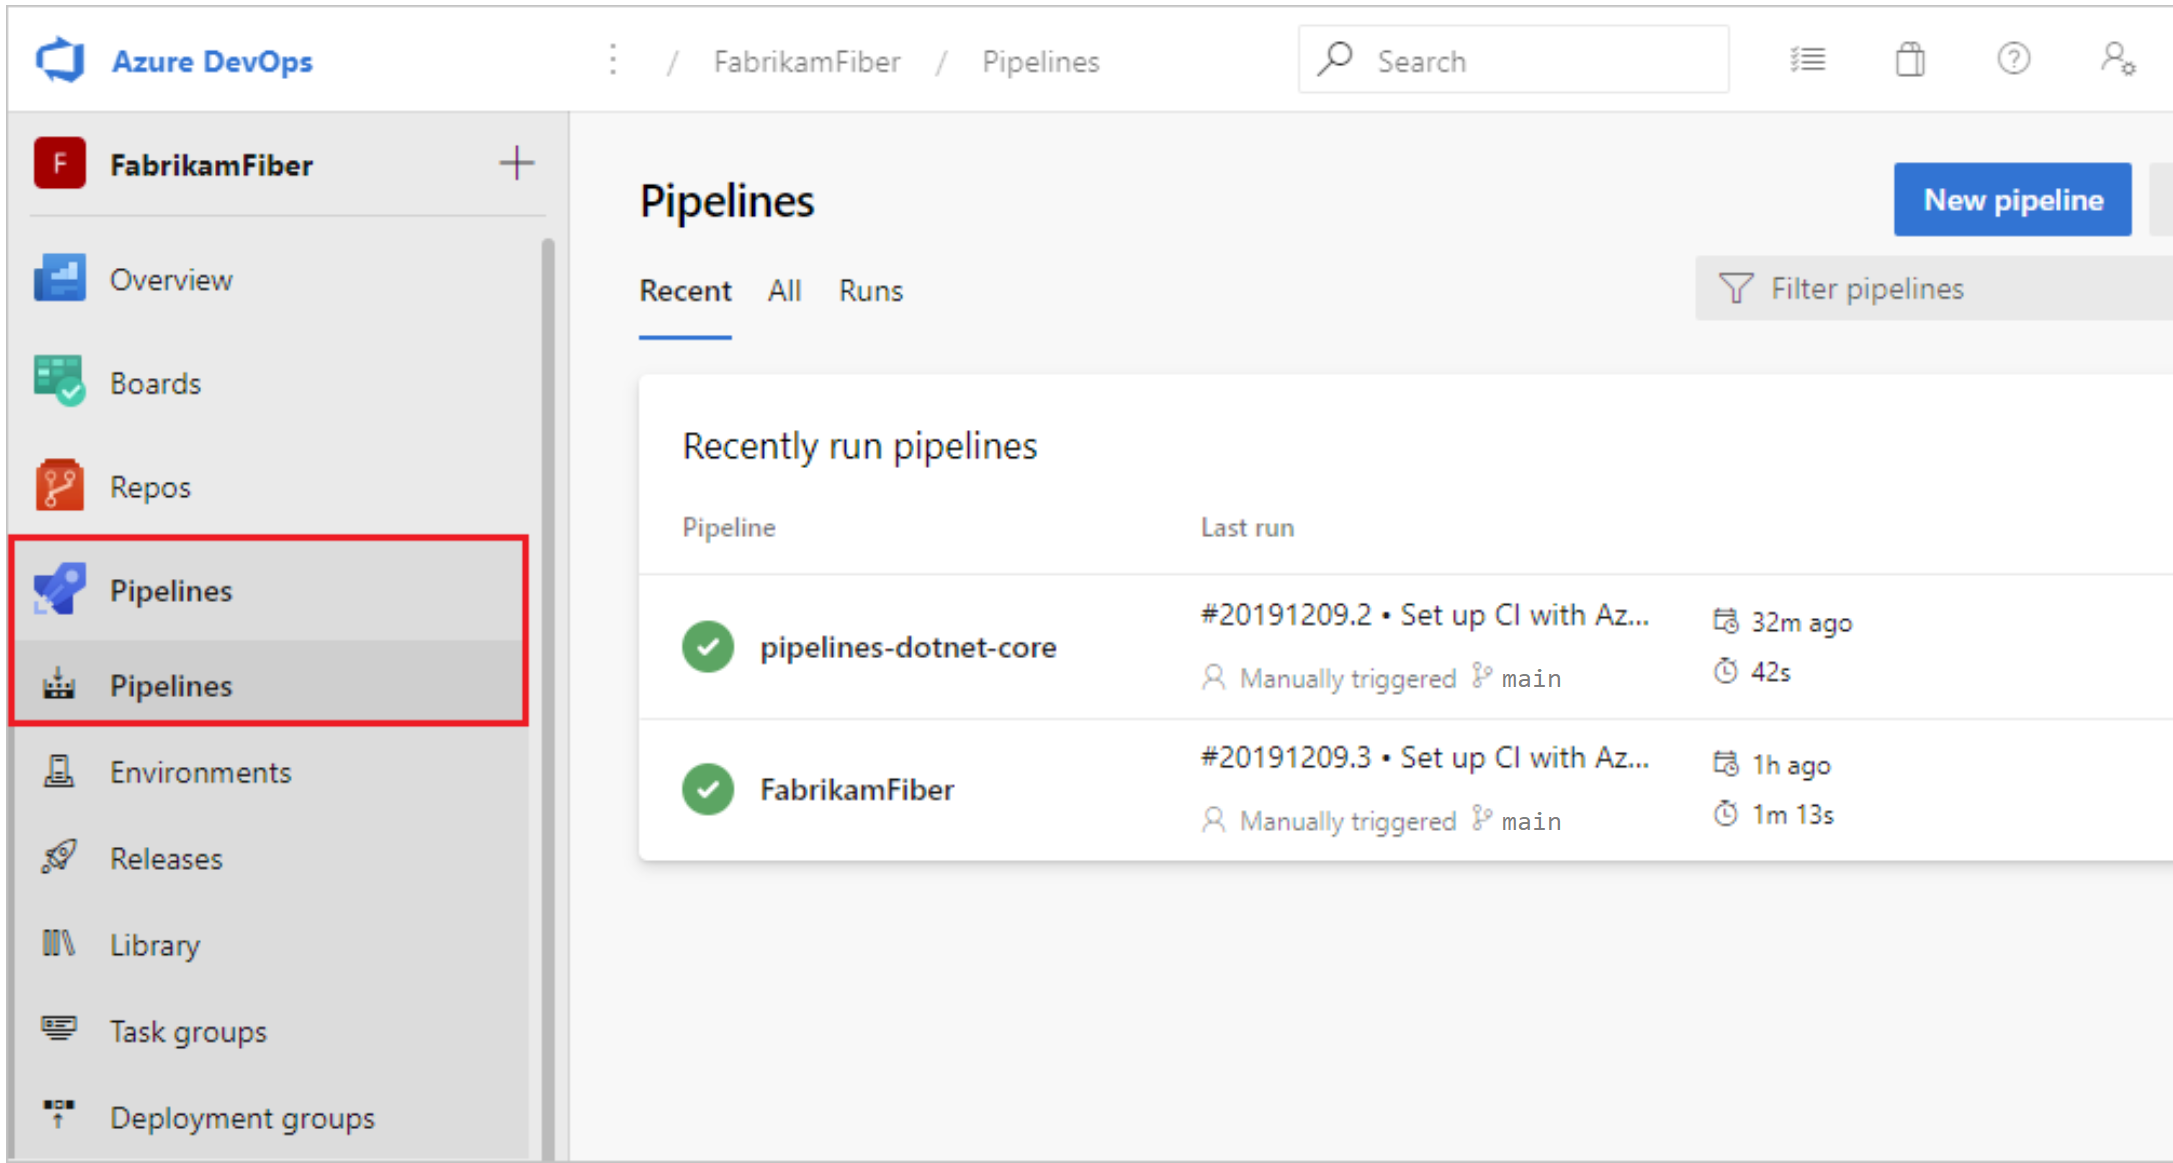 View pipelines